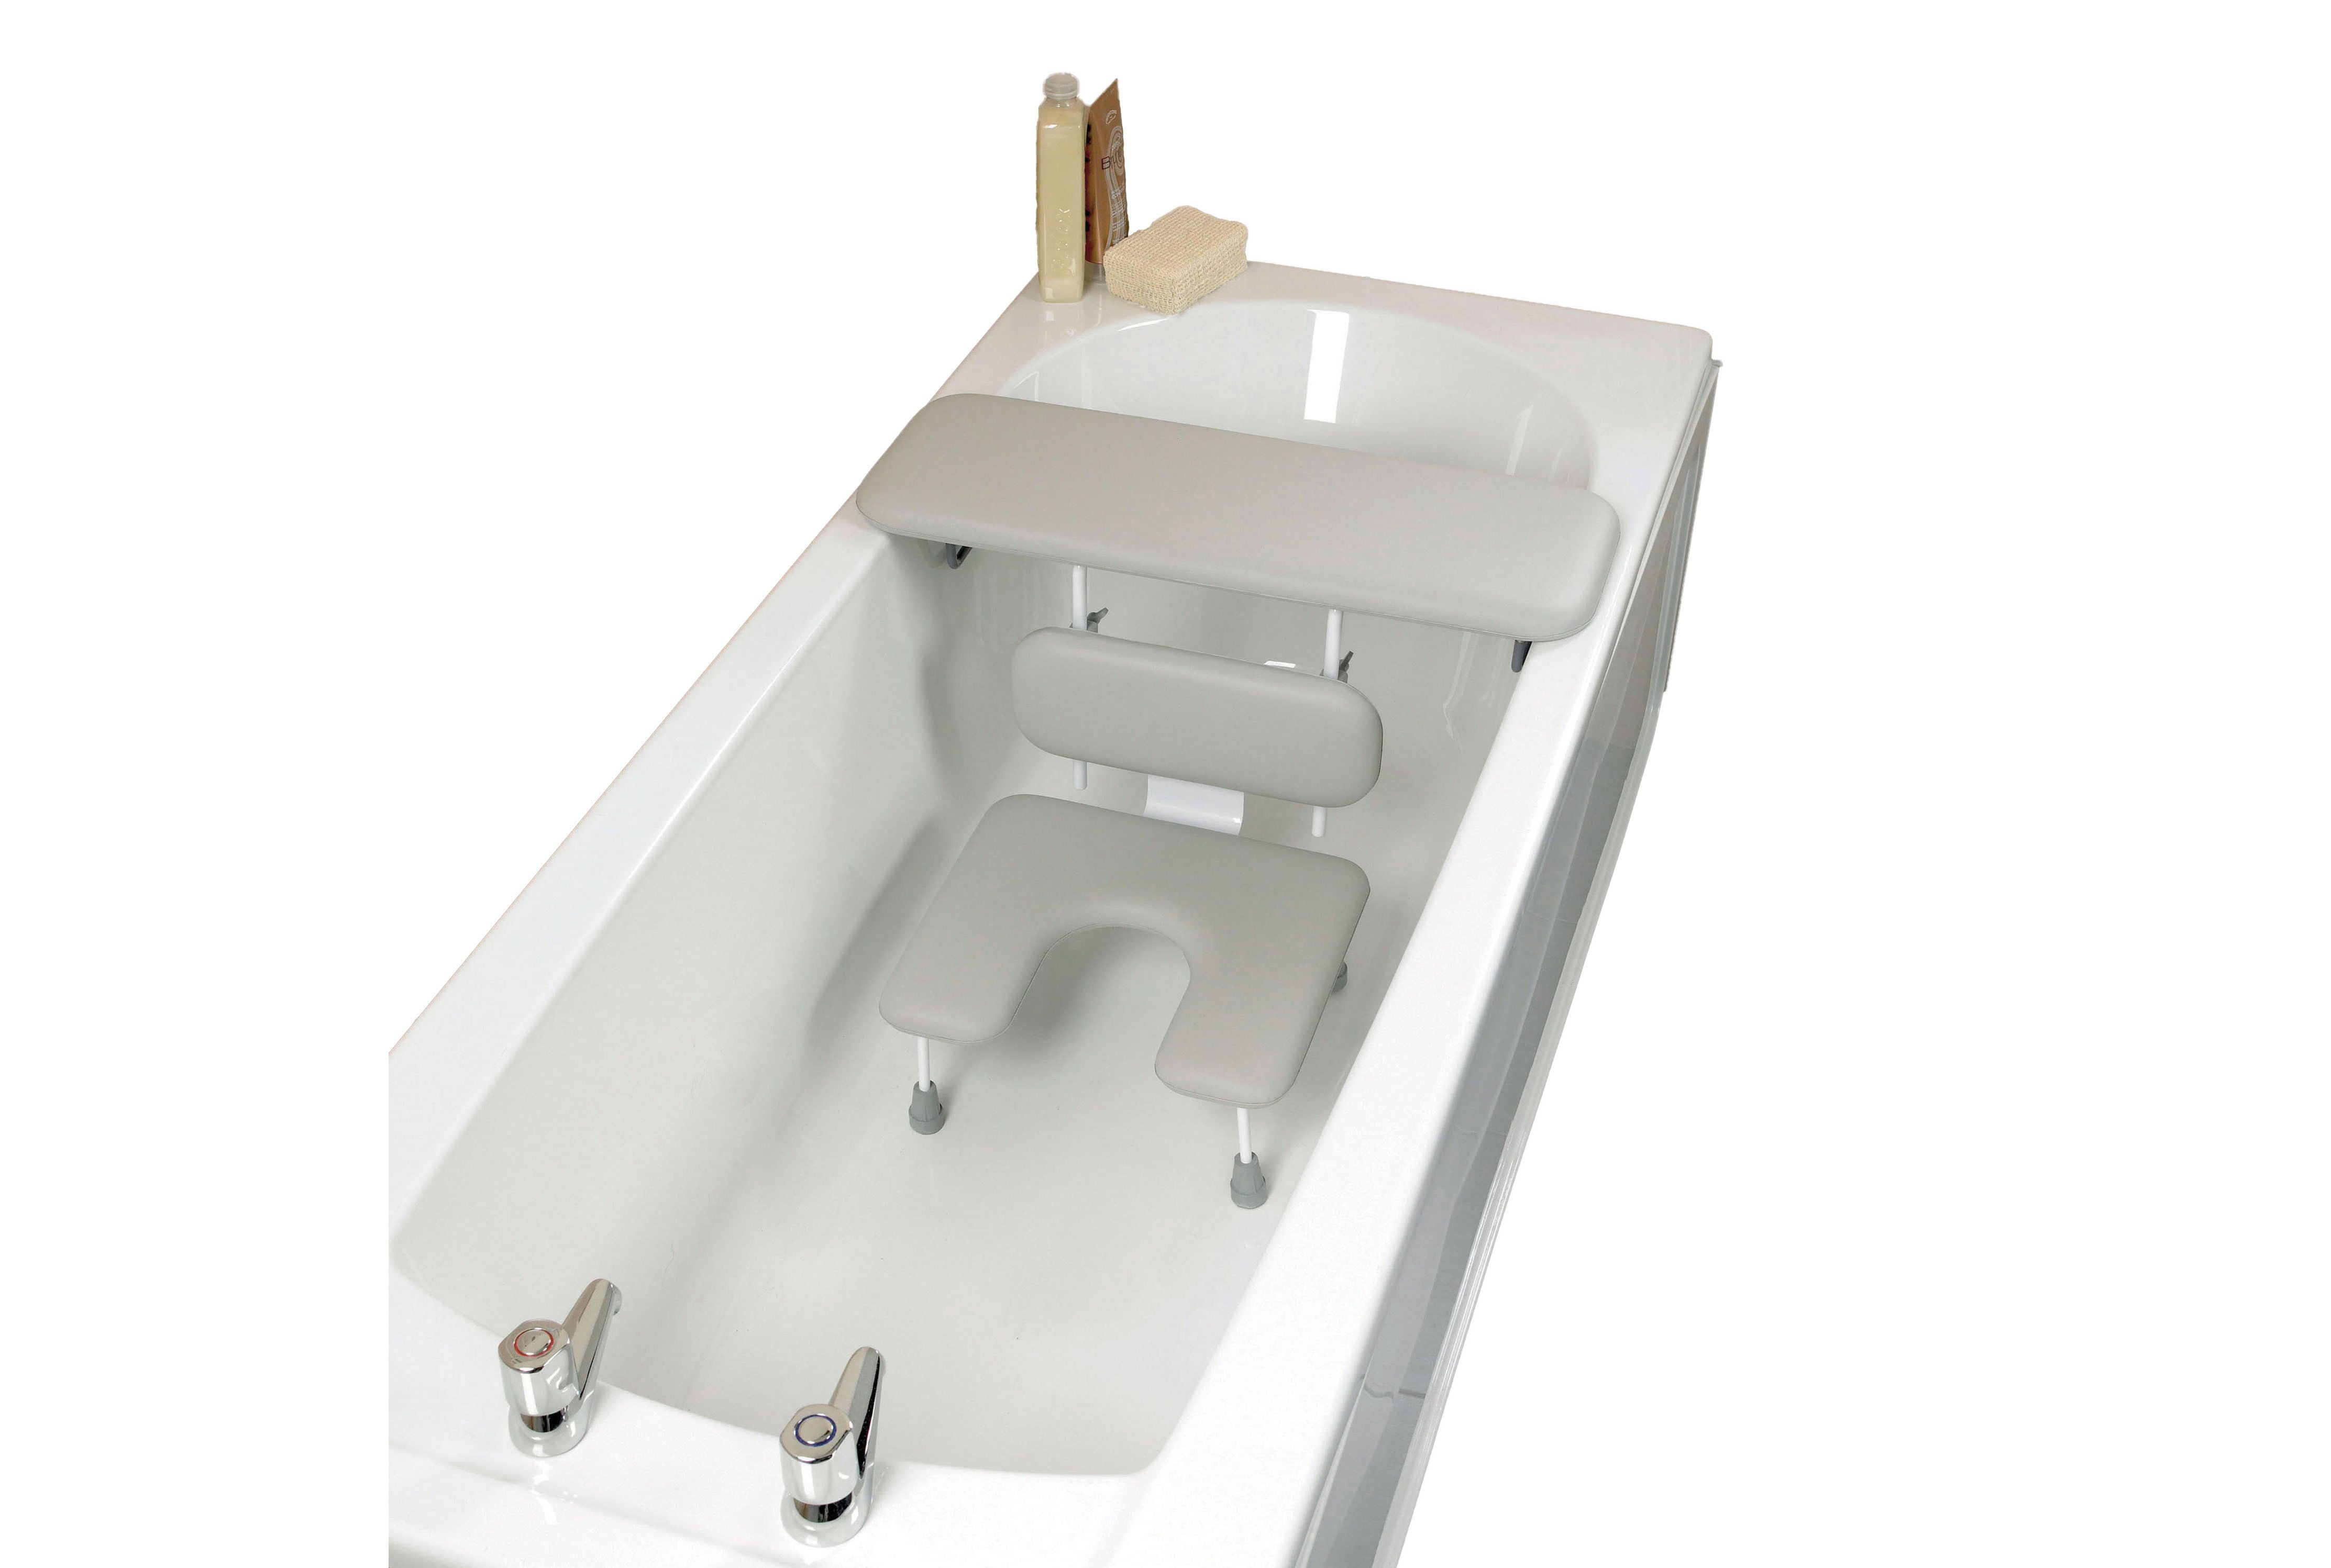 Bath board and seat combined